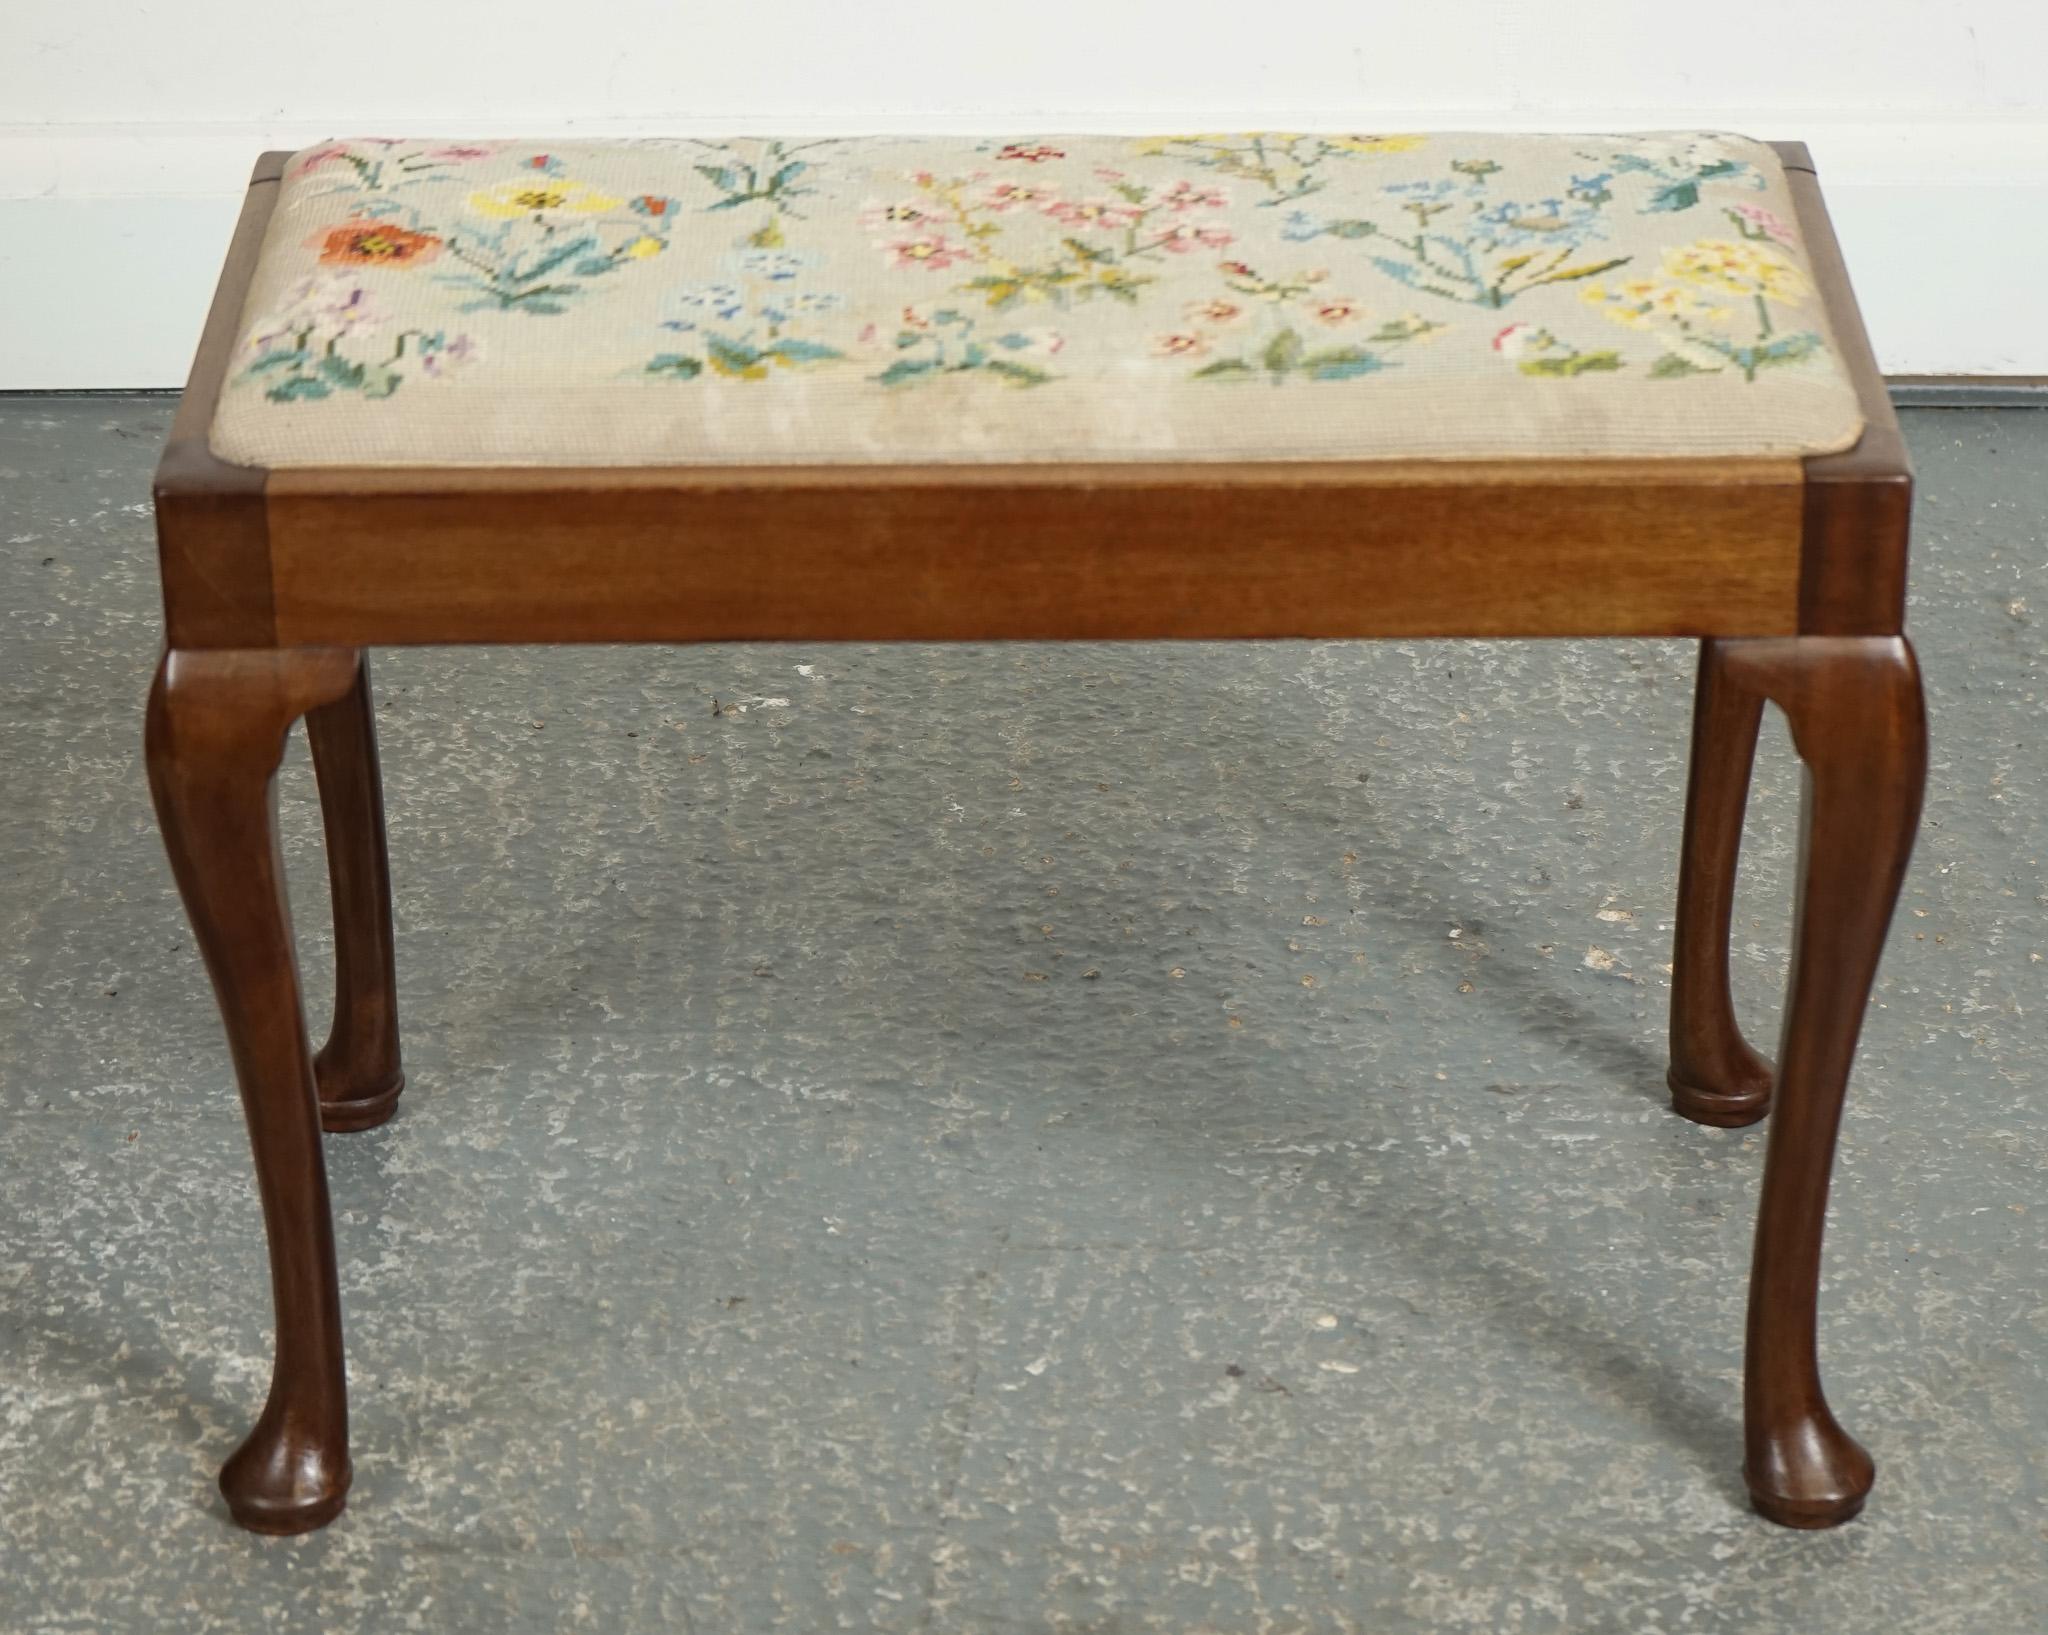 Queen Anne LARGE PIANO DRESSING TABLE STOOL WITH FLOWER STITCHWORK WITH QUEEN ANNE LEGS j1 For Sale